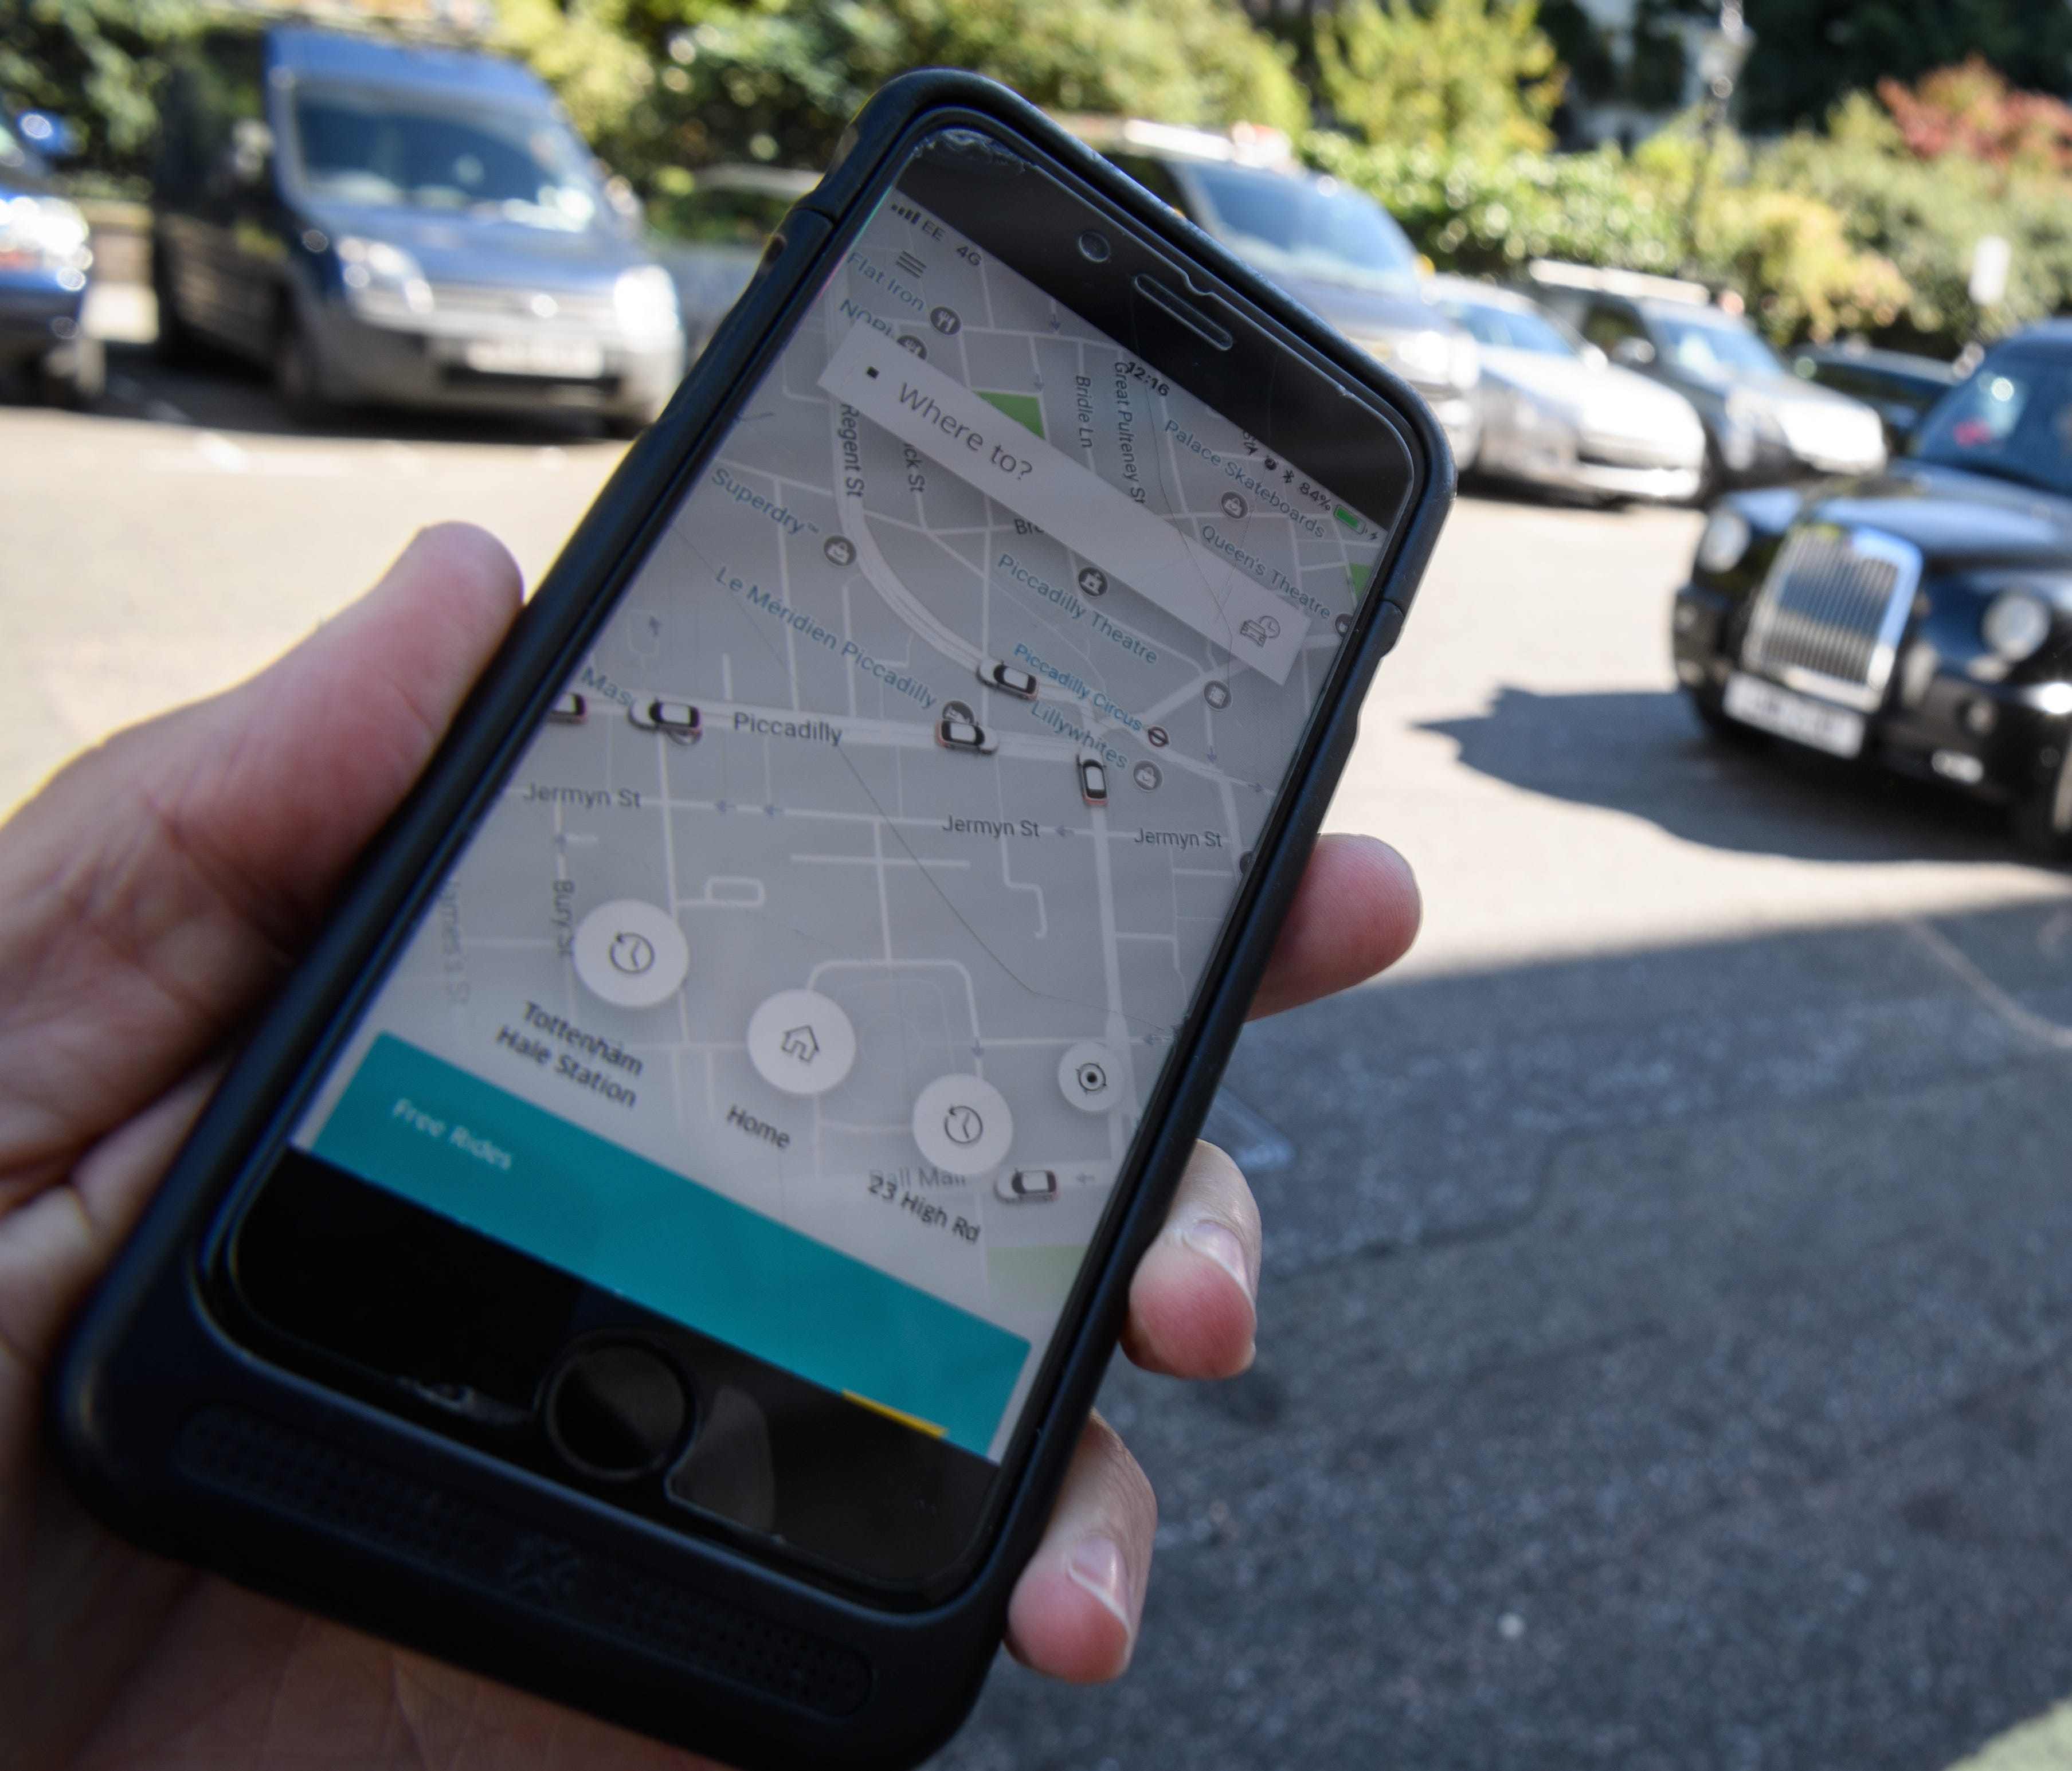 In this photo Illustration, a phone displays the Uber ride-hailing app on Sept. 22, 2017 in London, England.